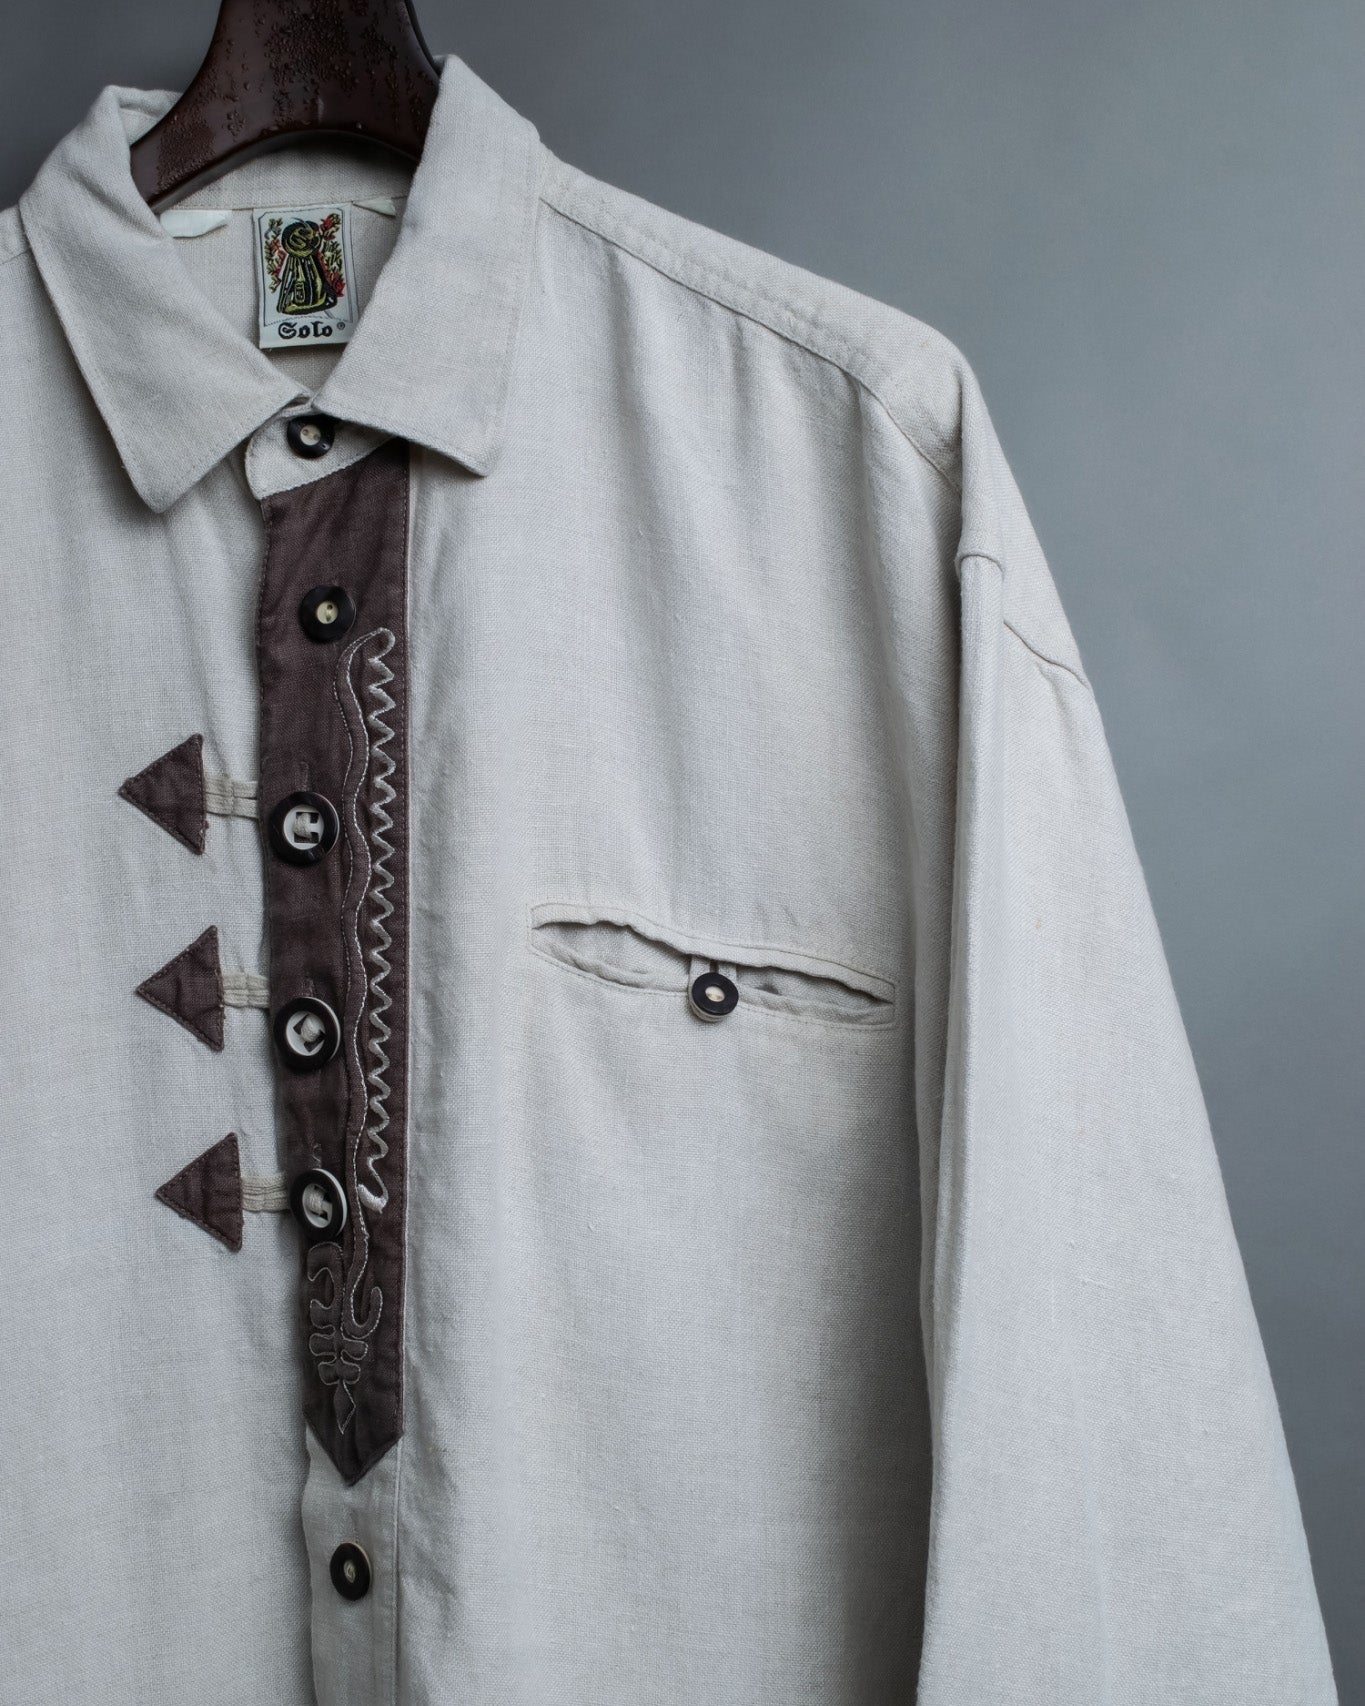 Vintage Embroidered Tyrolean Shirt